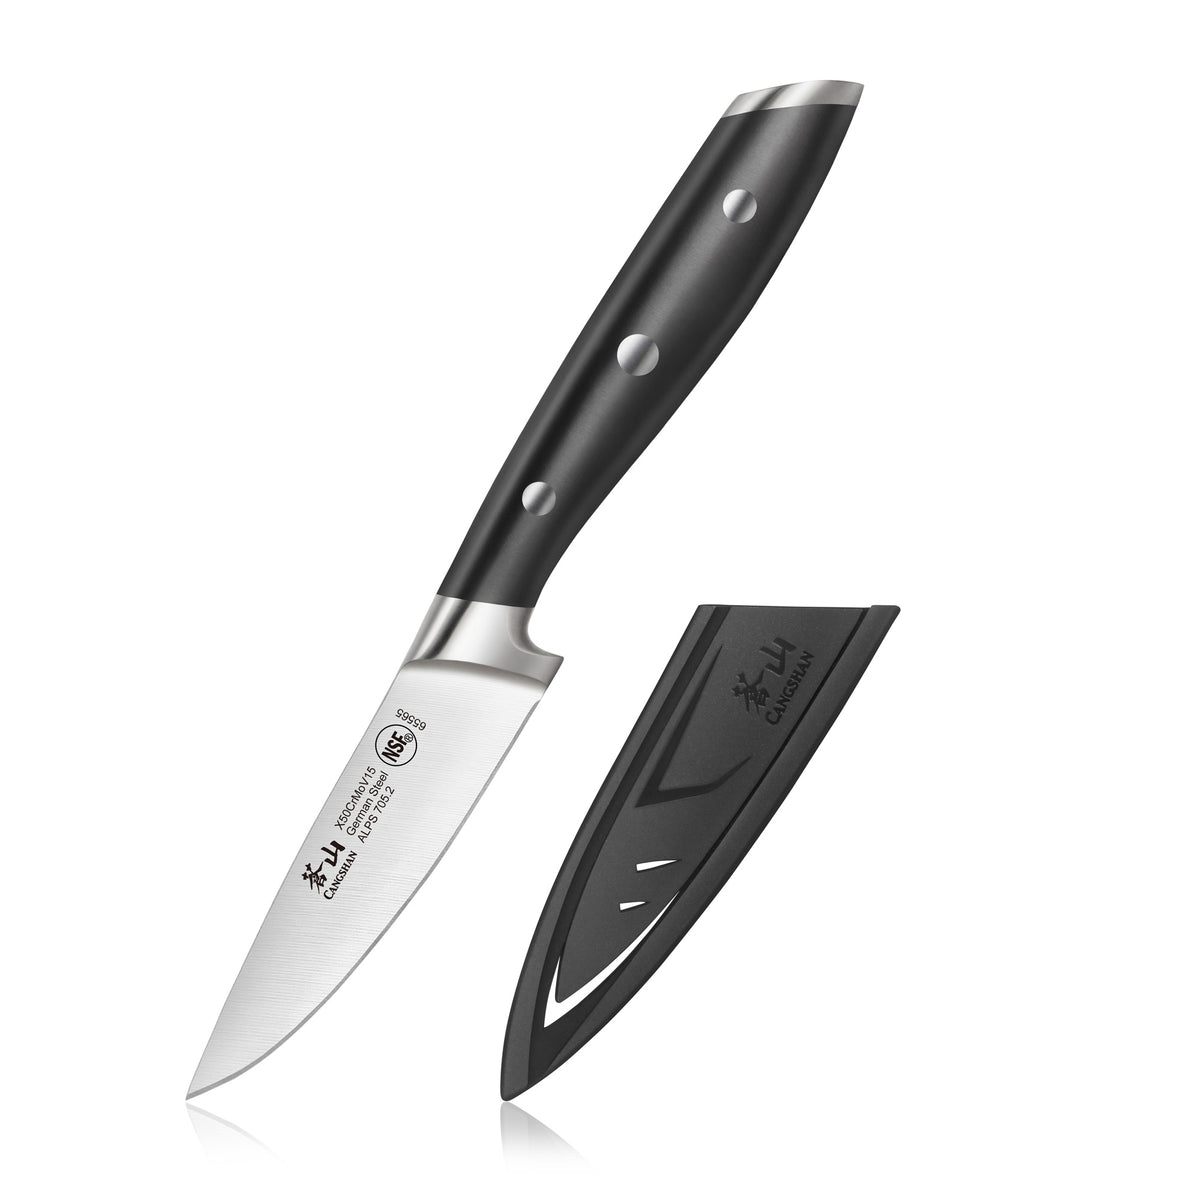 ALPS Series 3.5-Inch Paring Knife with Sheath, Forged German Steel